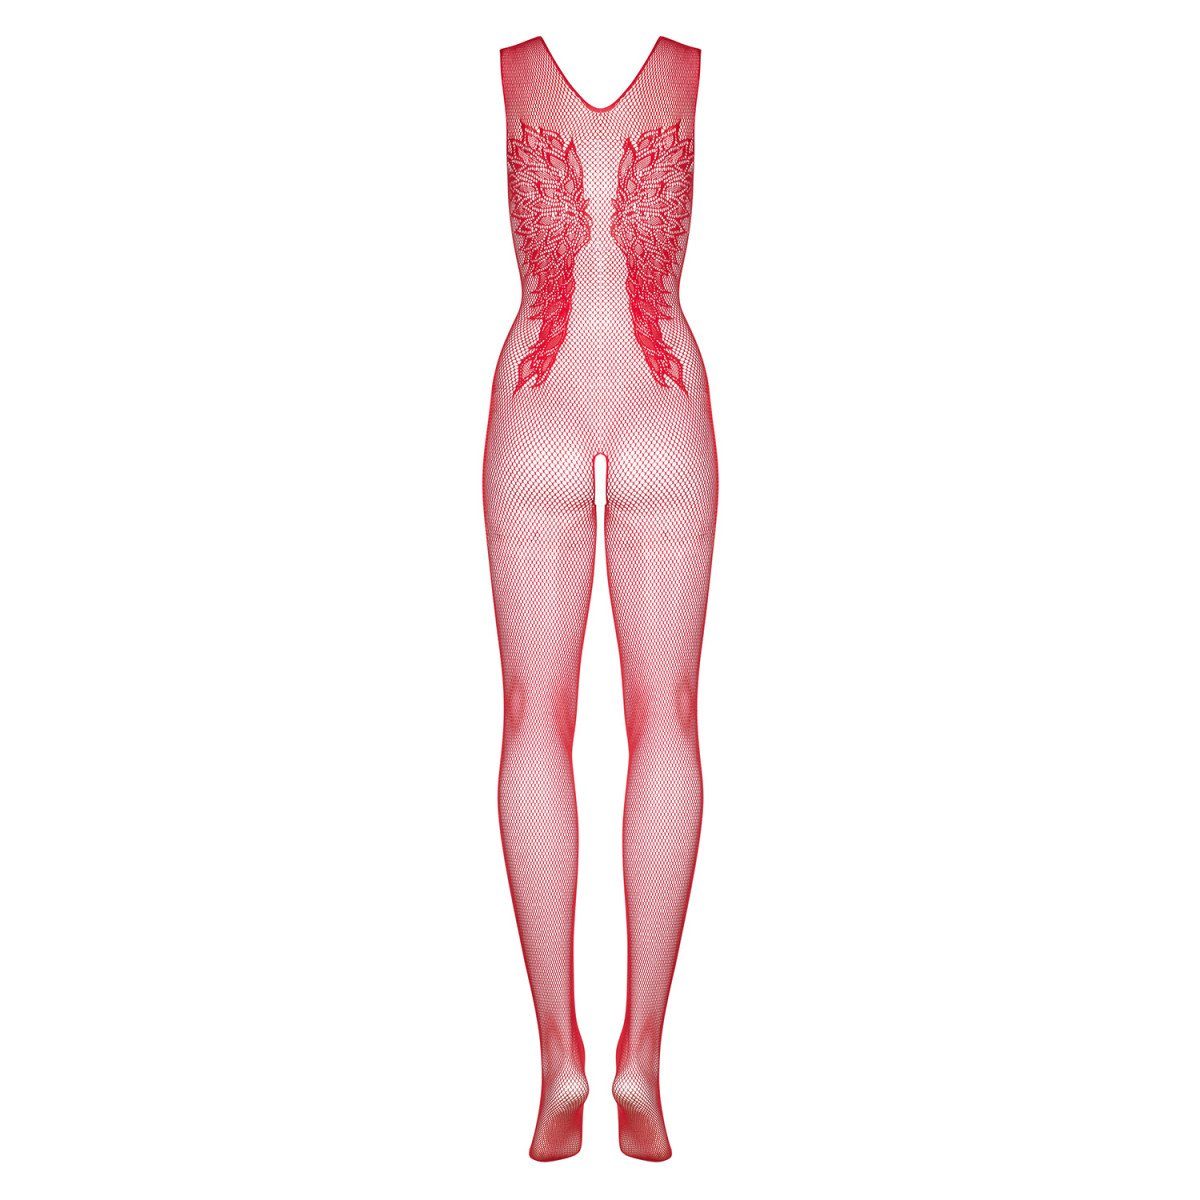 N112 Plus Bodystocking red Obsessive OB Catsuit (XXL) - Size